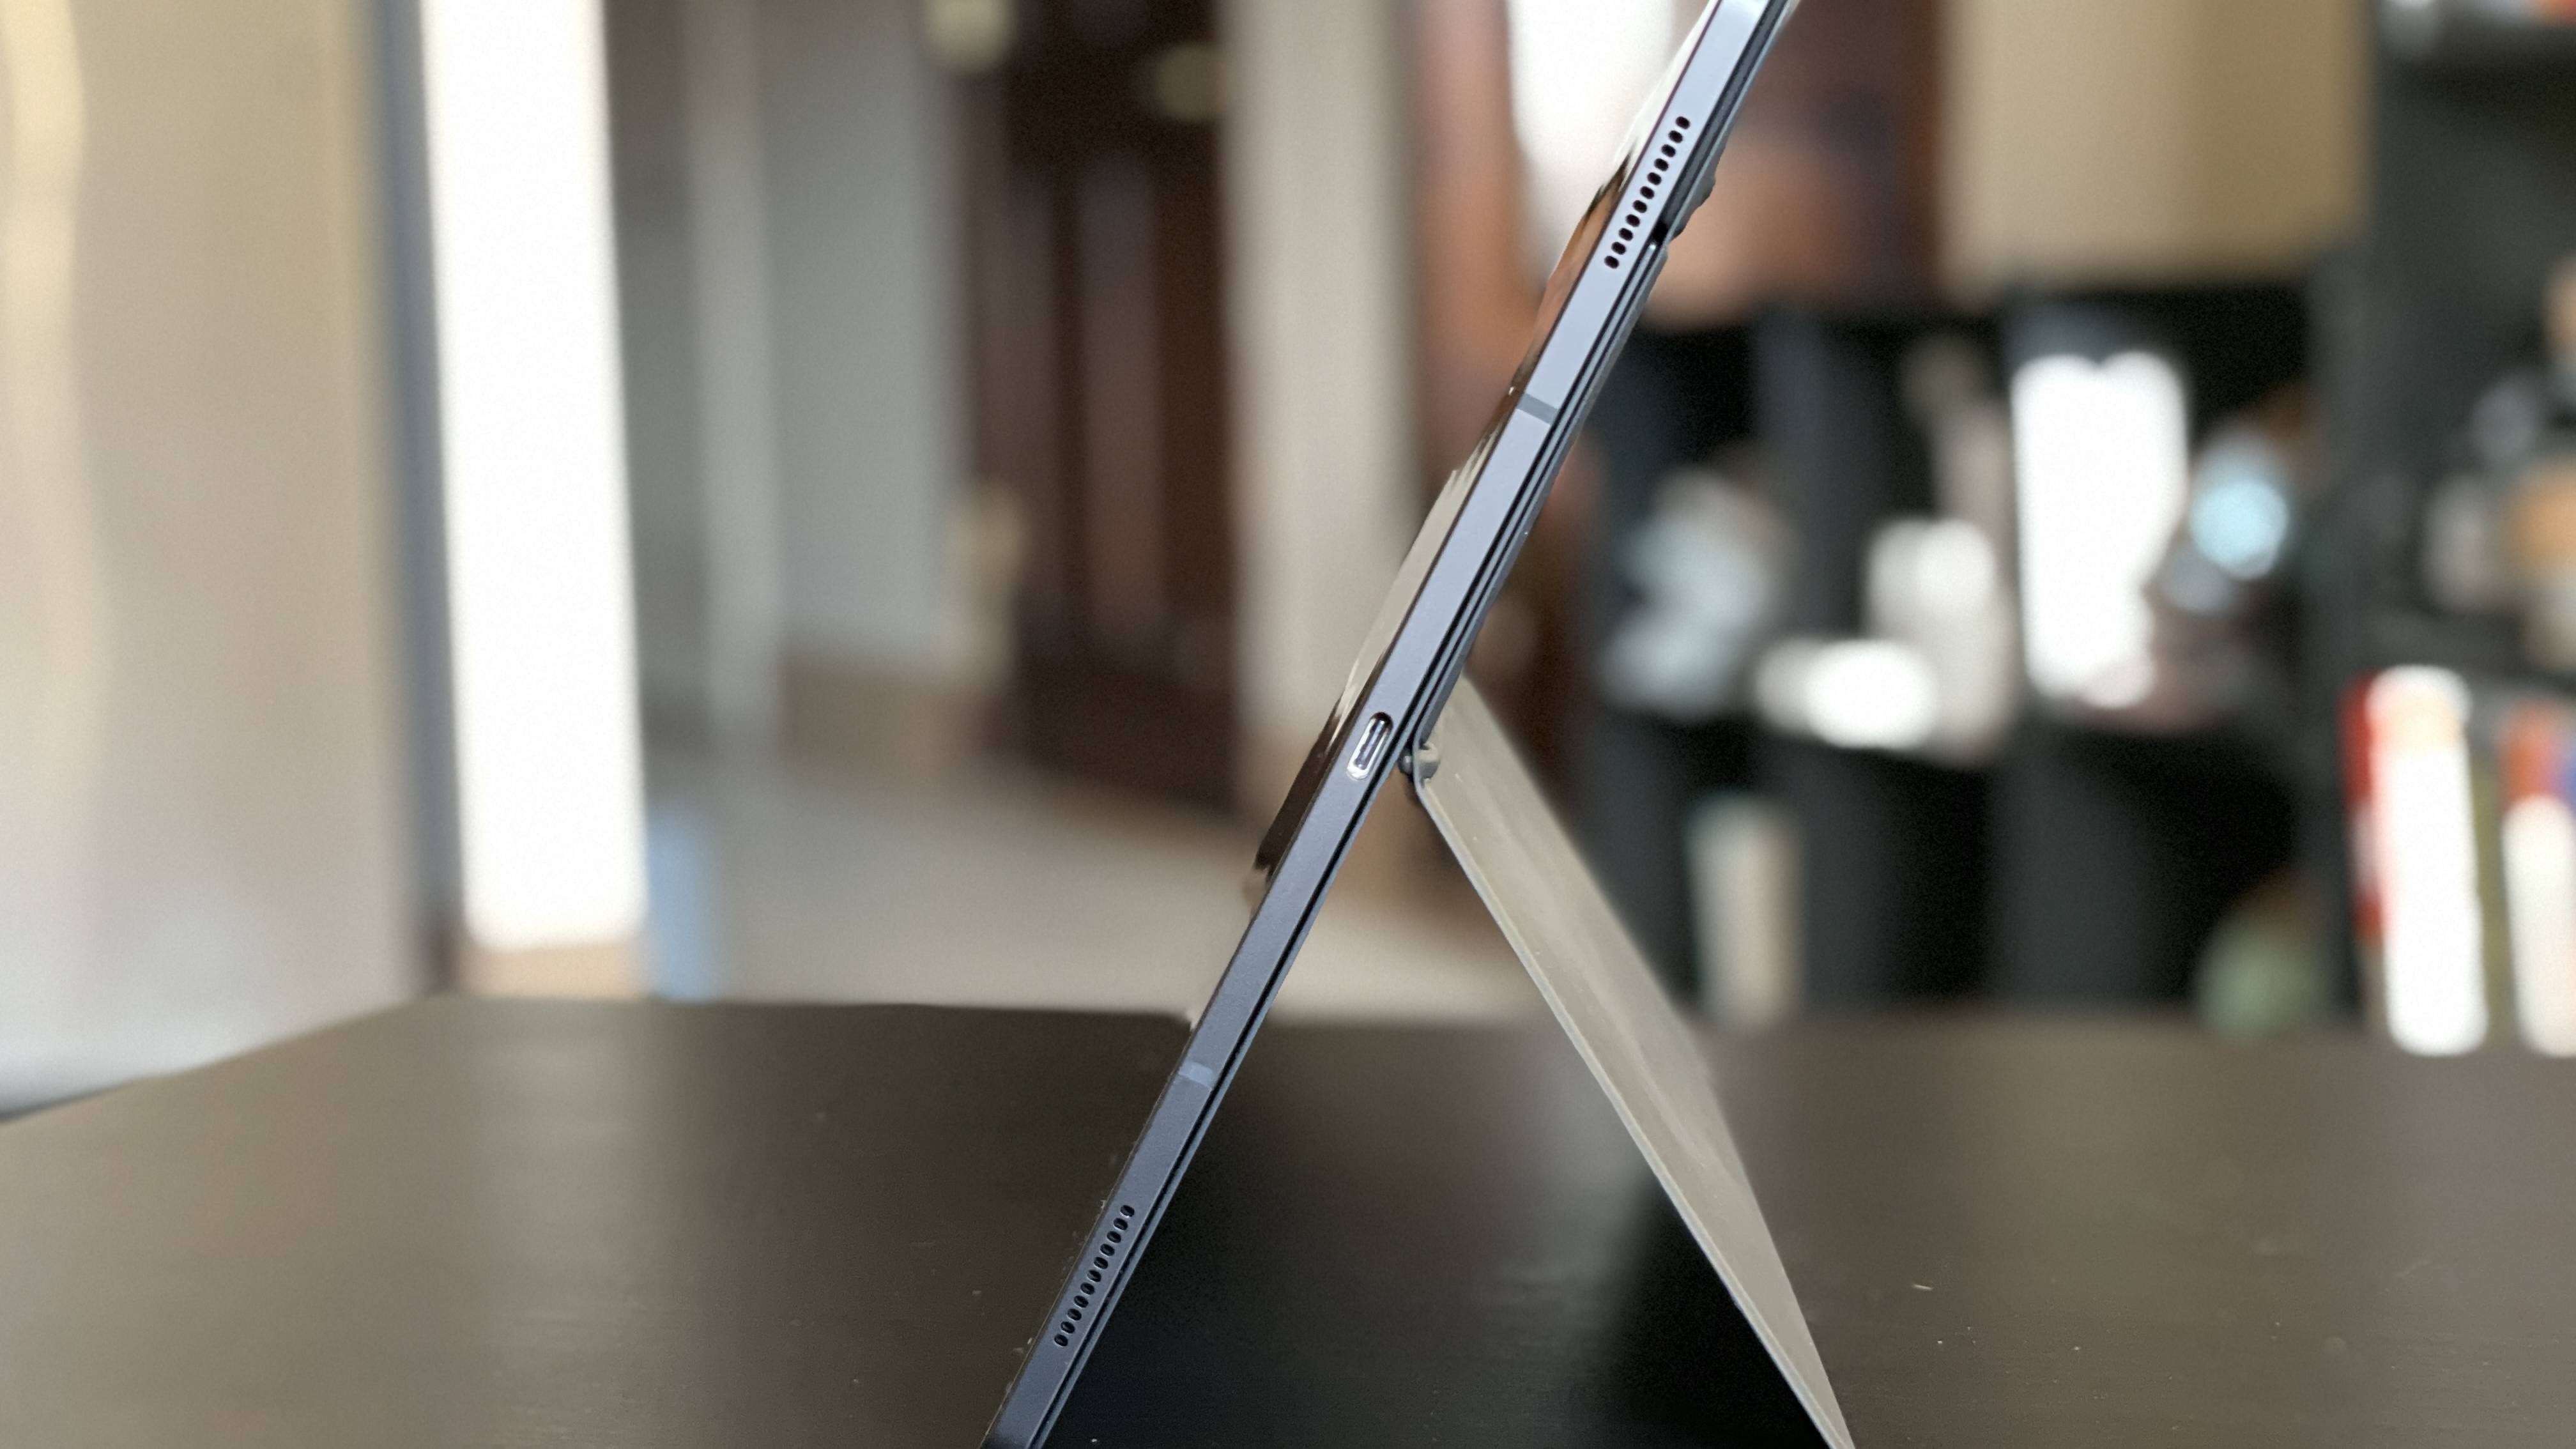 Samsung Galaxy Tab S8 Ultra review: Stunning hardware, but Android holds it  back